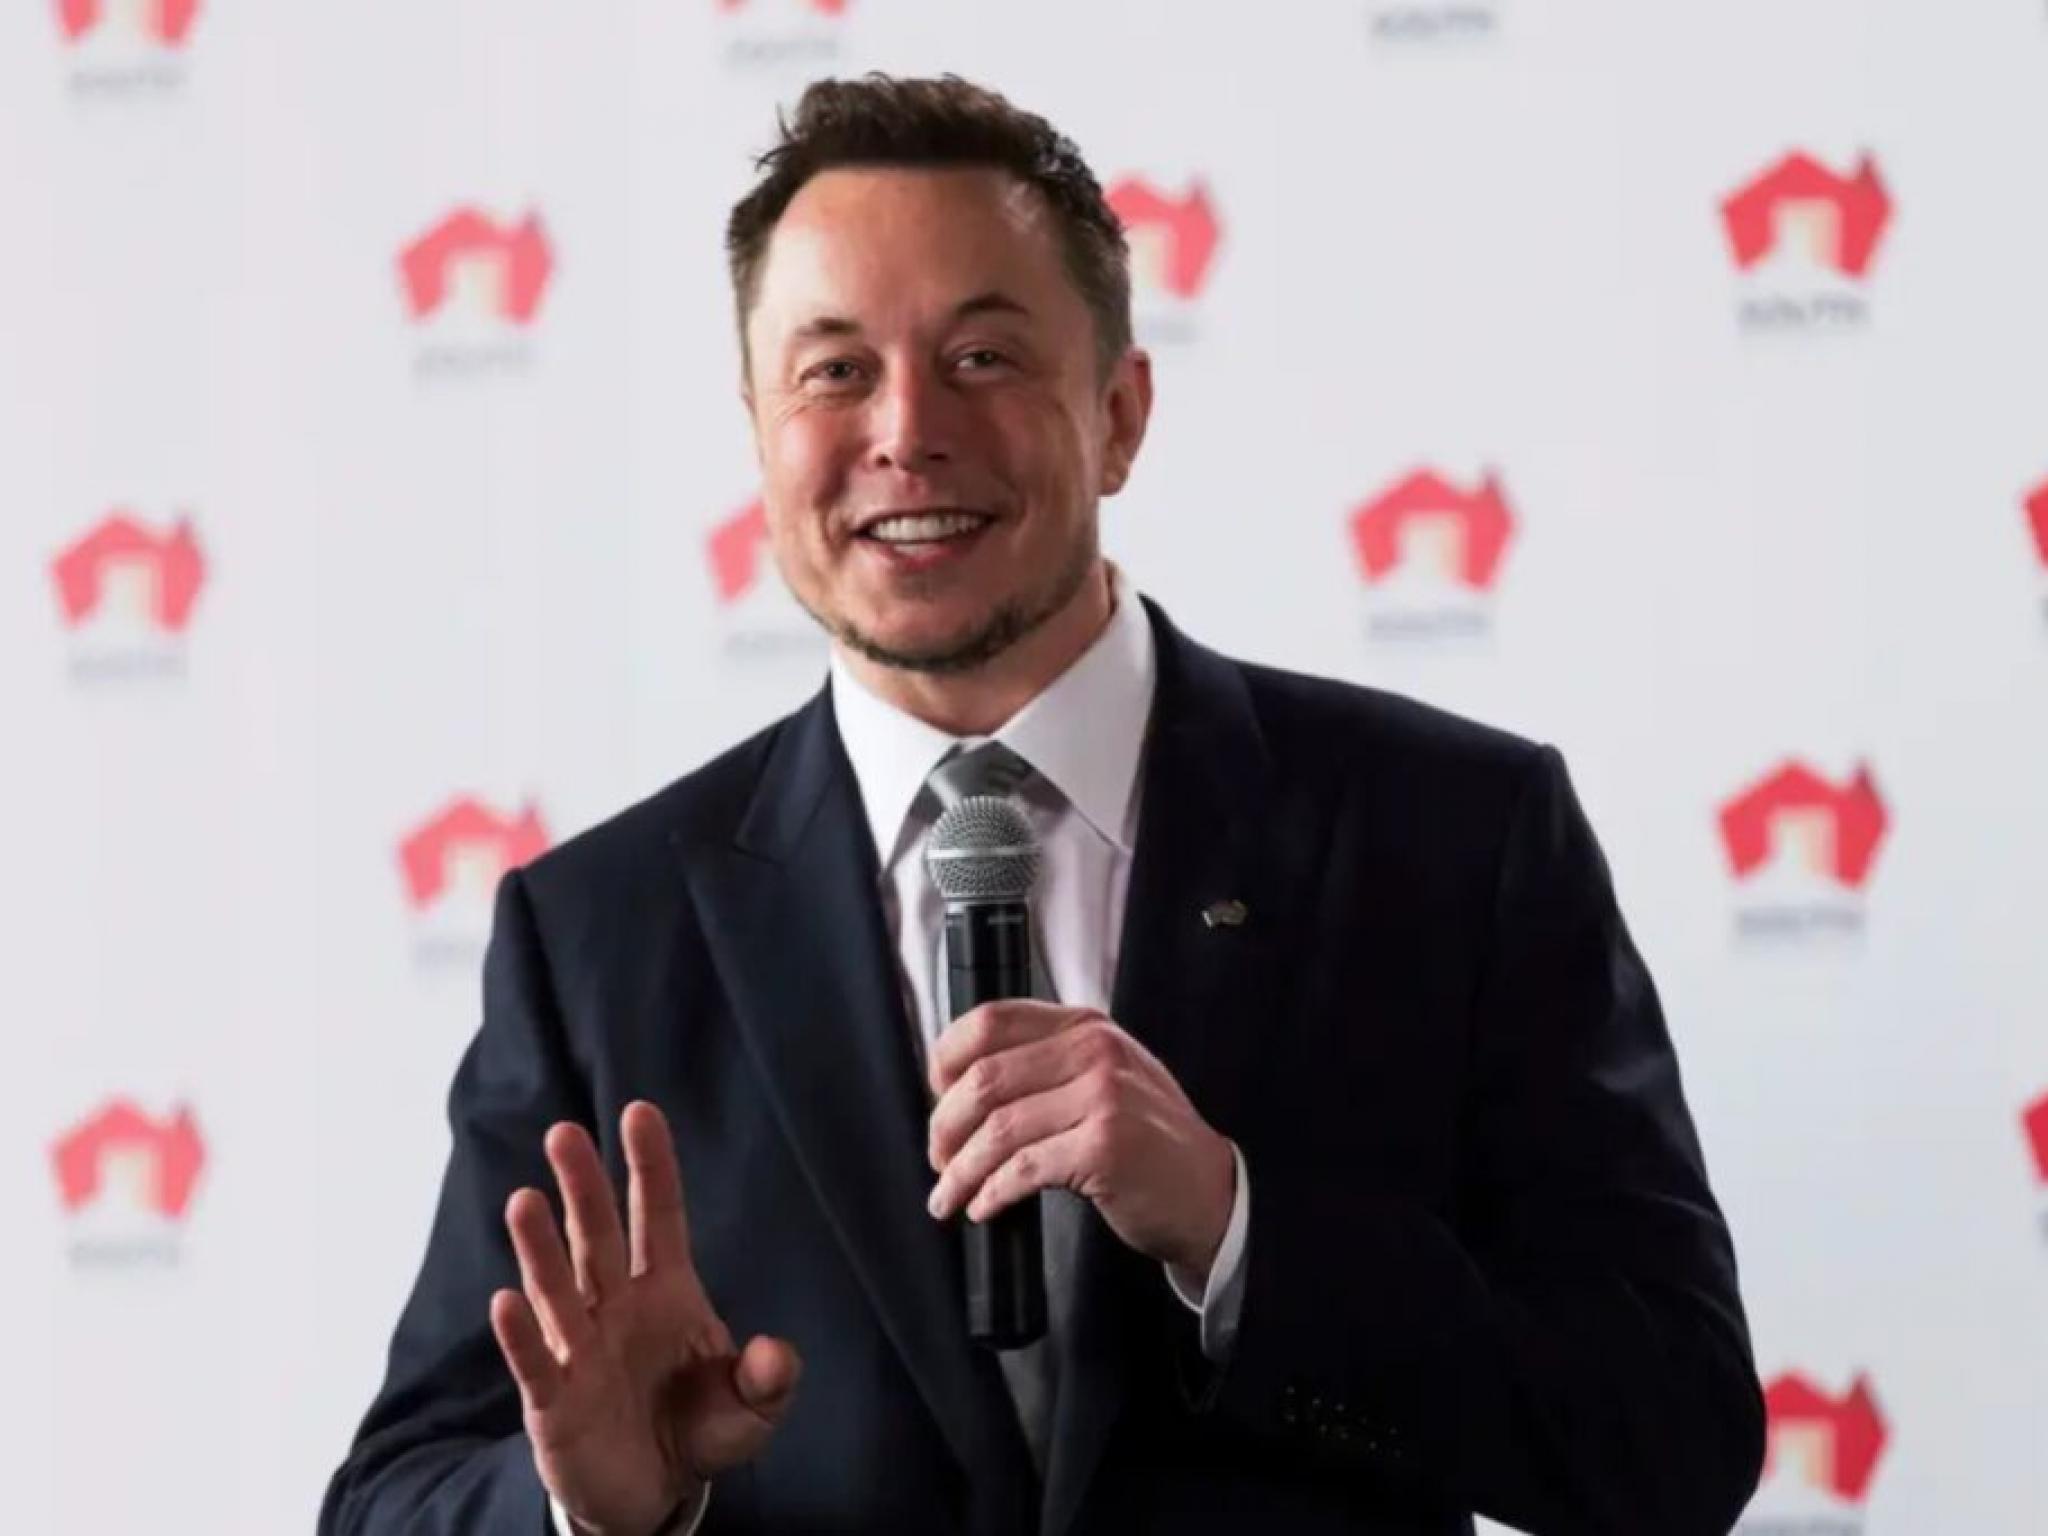  elon-musk-needs-to-achieve-this-with-robotaxi-if-tesla-wants-to-take-on-uber-and-lyft-until-then-its-all-day-dreaming-says-fund-manager 